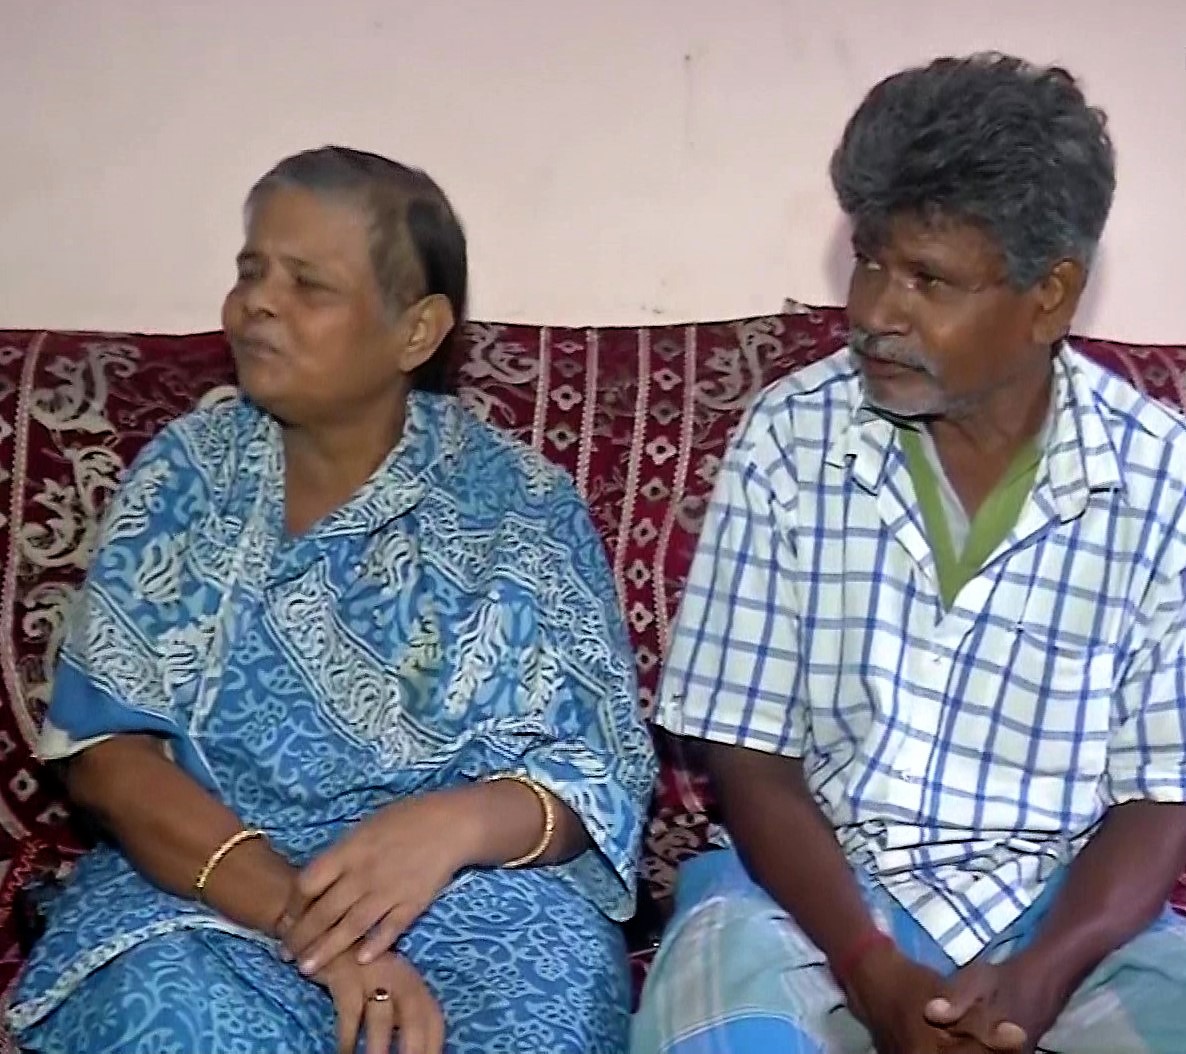 63yo widow donates assets worth 10mil rupees to rickshaw-puller who served her family for 25 years | weirdkaya